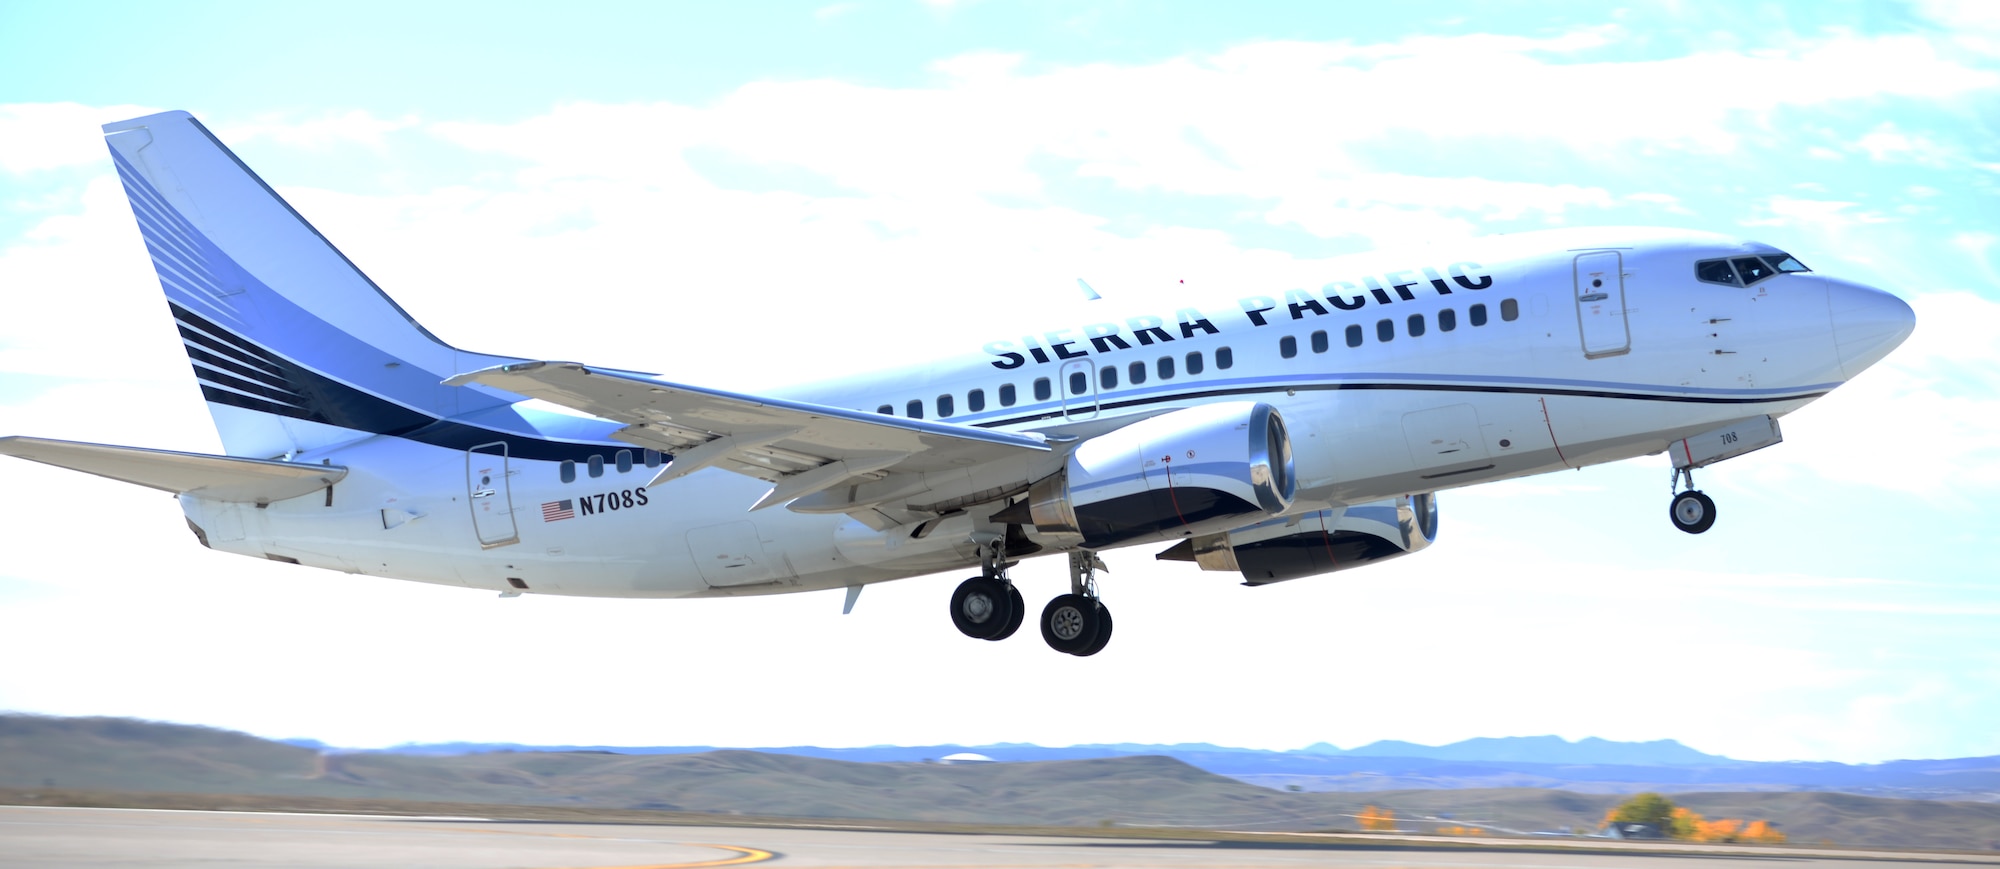 A Boeing 737 takes off from Ellsworth Air Force Base, S.D., transporting Airmen to Nellis Air Force Base, Nev., to participate in Green Flag exercise 18-1 Oct. 16, 2017. Aircrew from the 34th and 37th Bomb Squadrons and maintainers from the 34th Aircraft Maintenance Unit, are participating in the joint exercise to hone their skills in realistic training scenarios aimed at providing close-air support to U.S Army units on the ground. (U.S. Air Force photo by Airman 1st Class Thomas Karol)